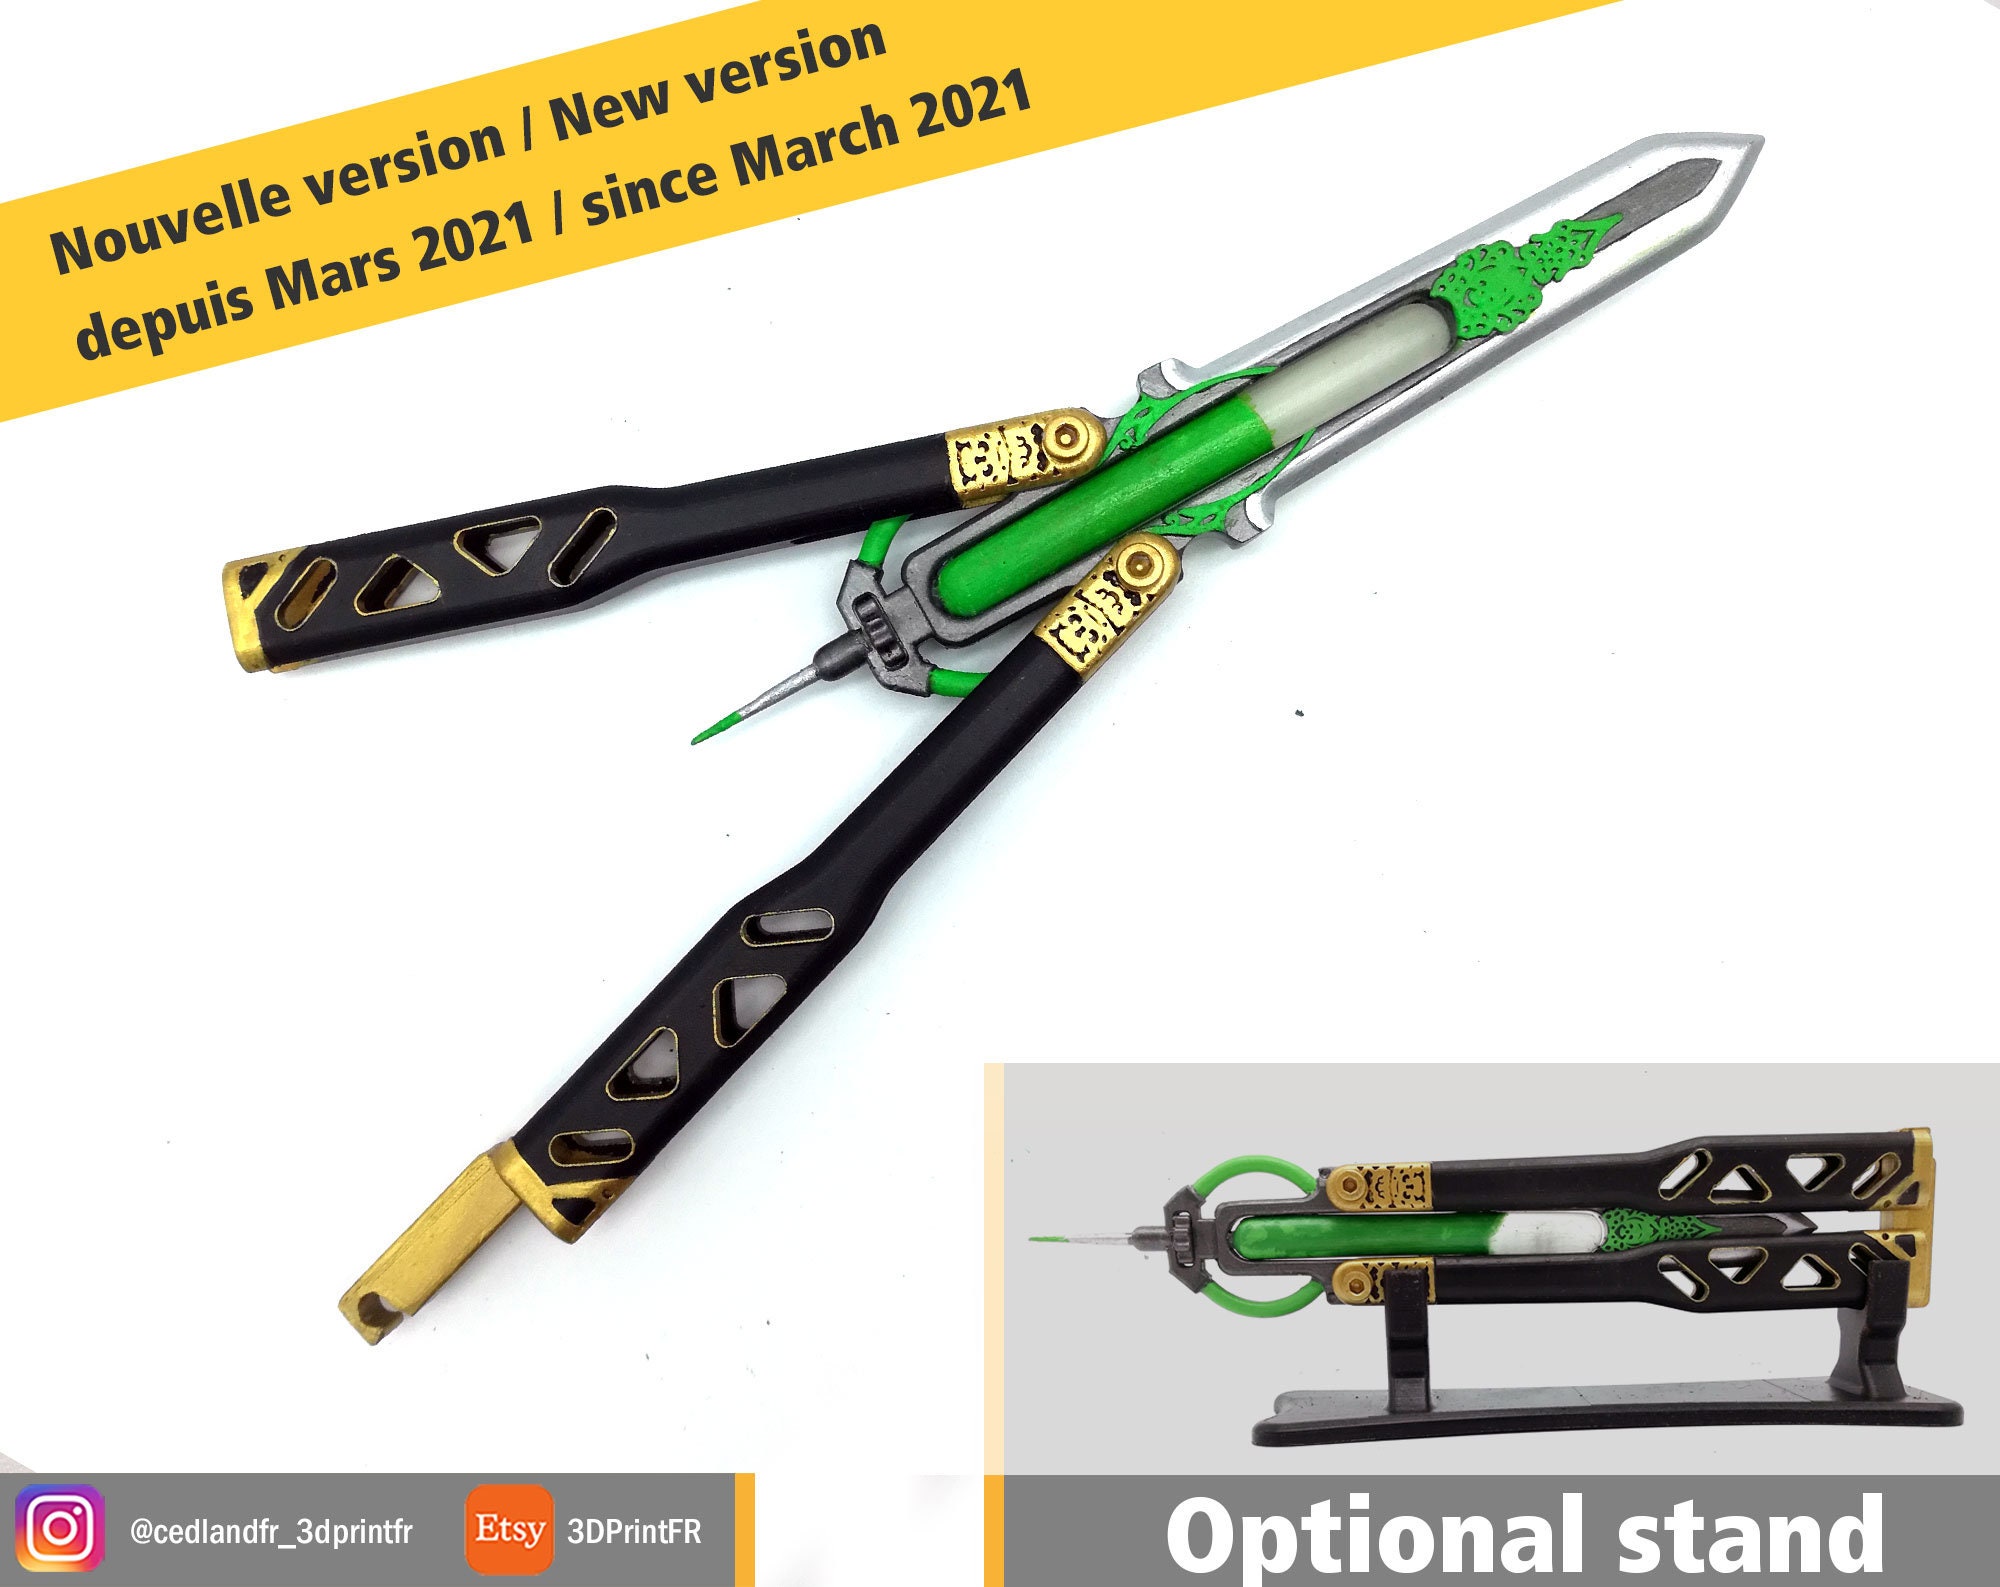 Octane Butterfly Knife Of the Apex Legends Replica Game 1:1 | Etsy